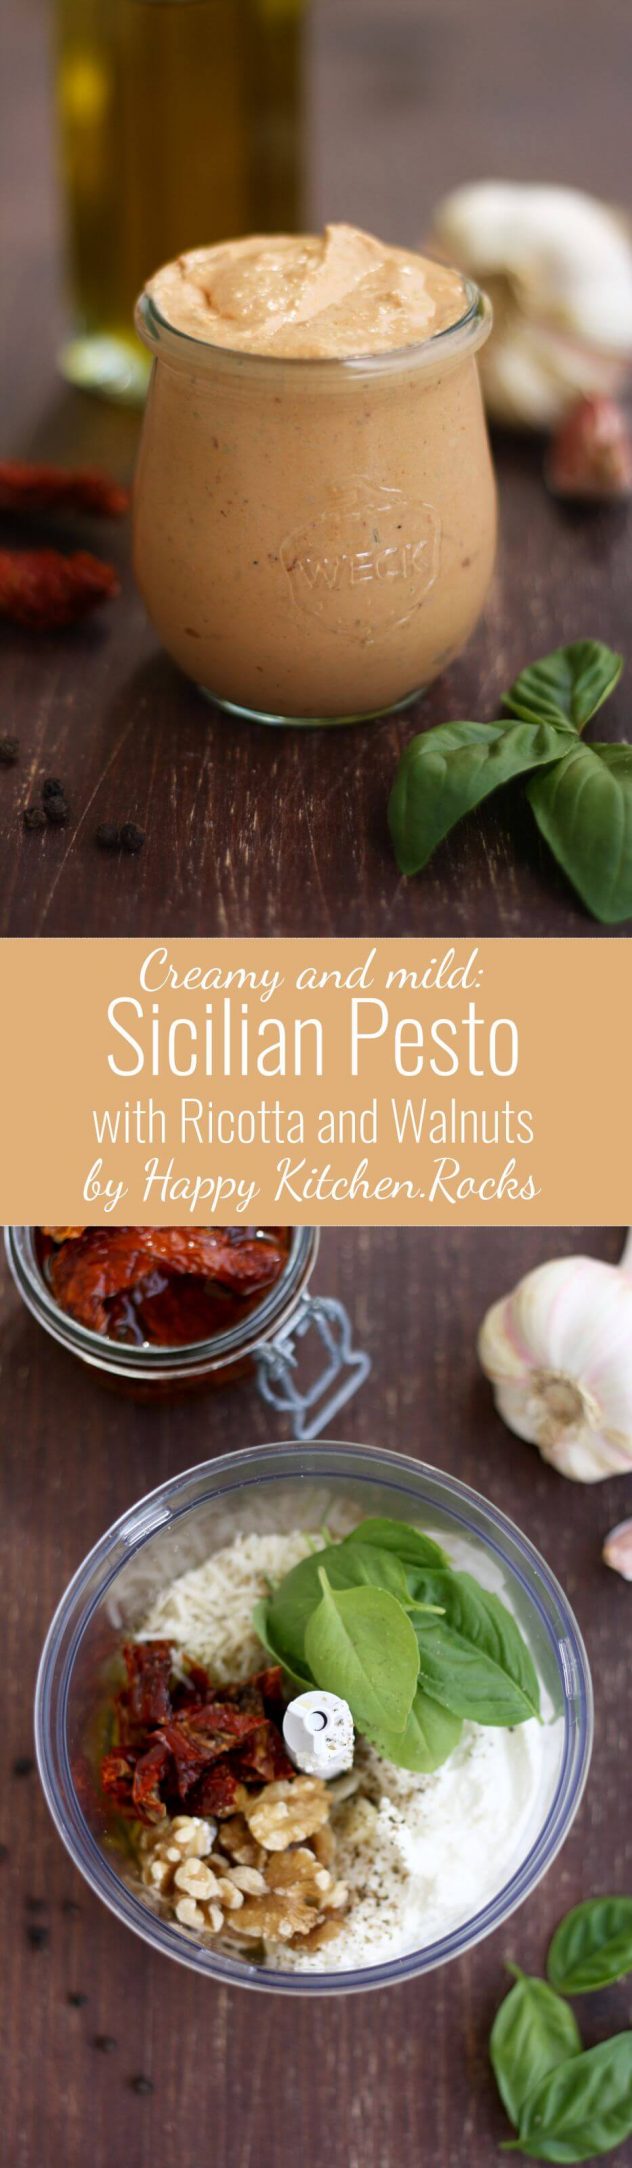 Creamy Sicilian Pesto with Ricotta and Walnuts has mild and delicate flavor and is perfect with pasta, sandwiches or vegetables. 10-minute easy recipe.